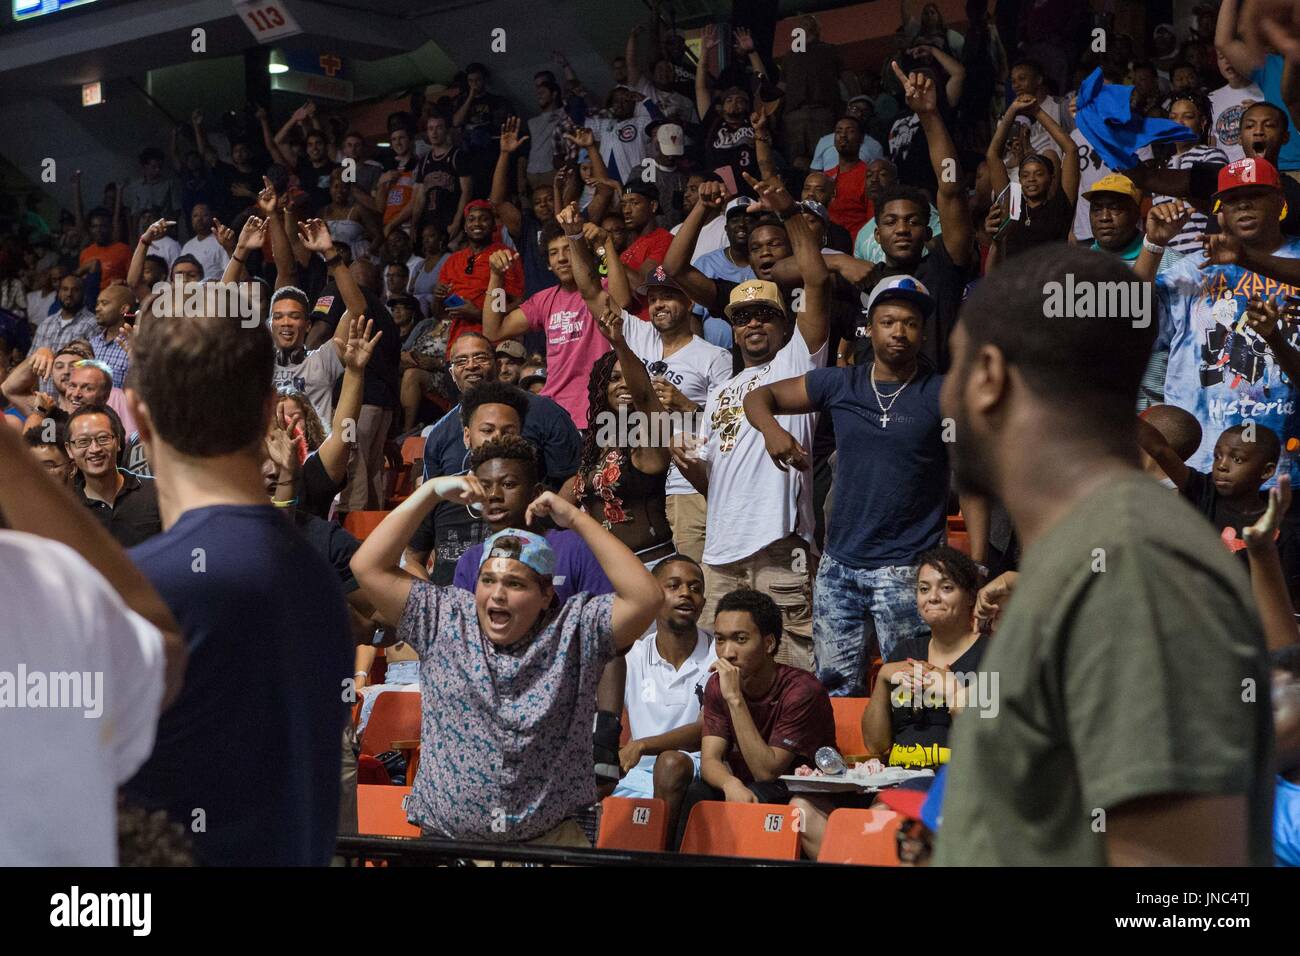 Fans rushing to volunteer for chance to win $5000 by successfully shooting basket into hoop 4-point line Big3 Week 5 3-on-3 tournament UIC Pavilion July 23,2017 Chicago,Illinois. Stock Photo